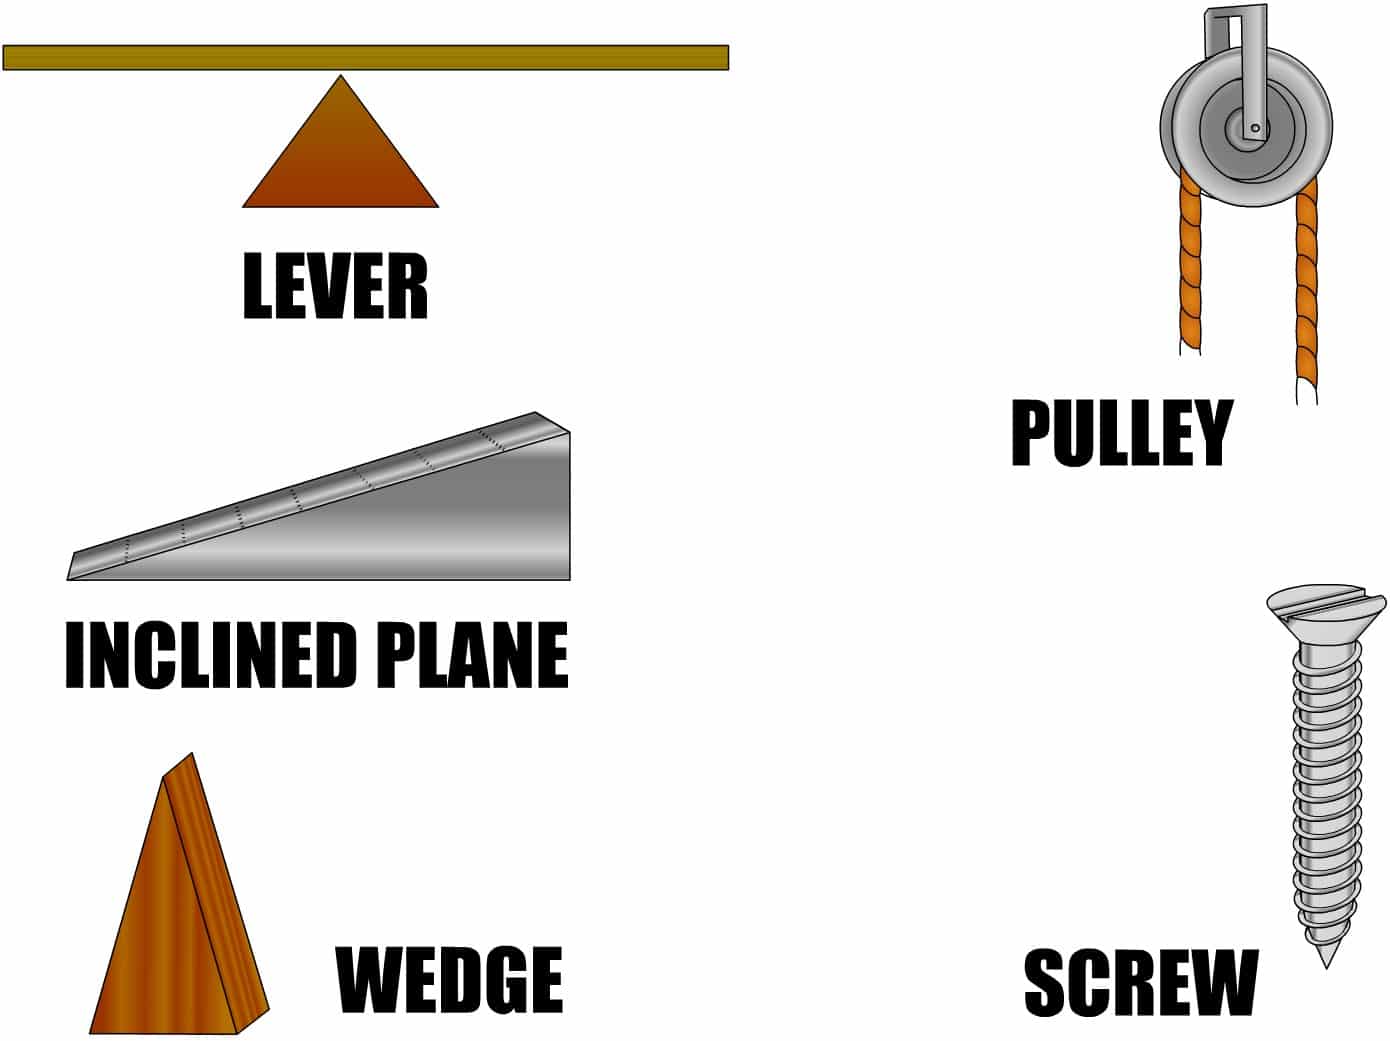 simple machines examples of inclined plane